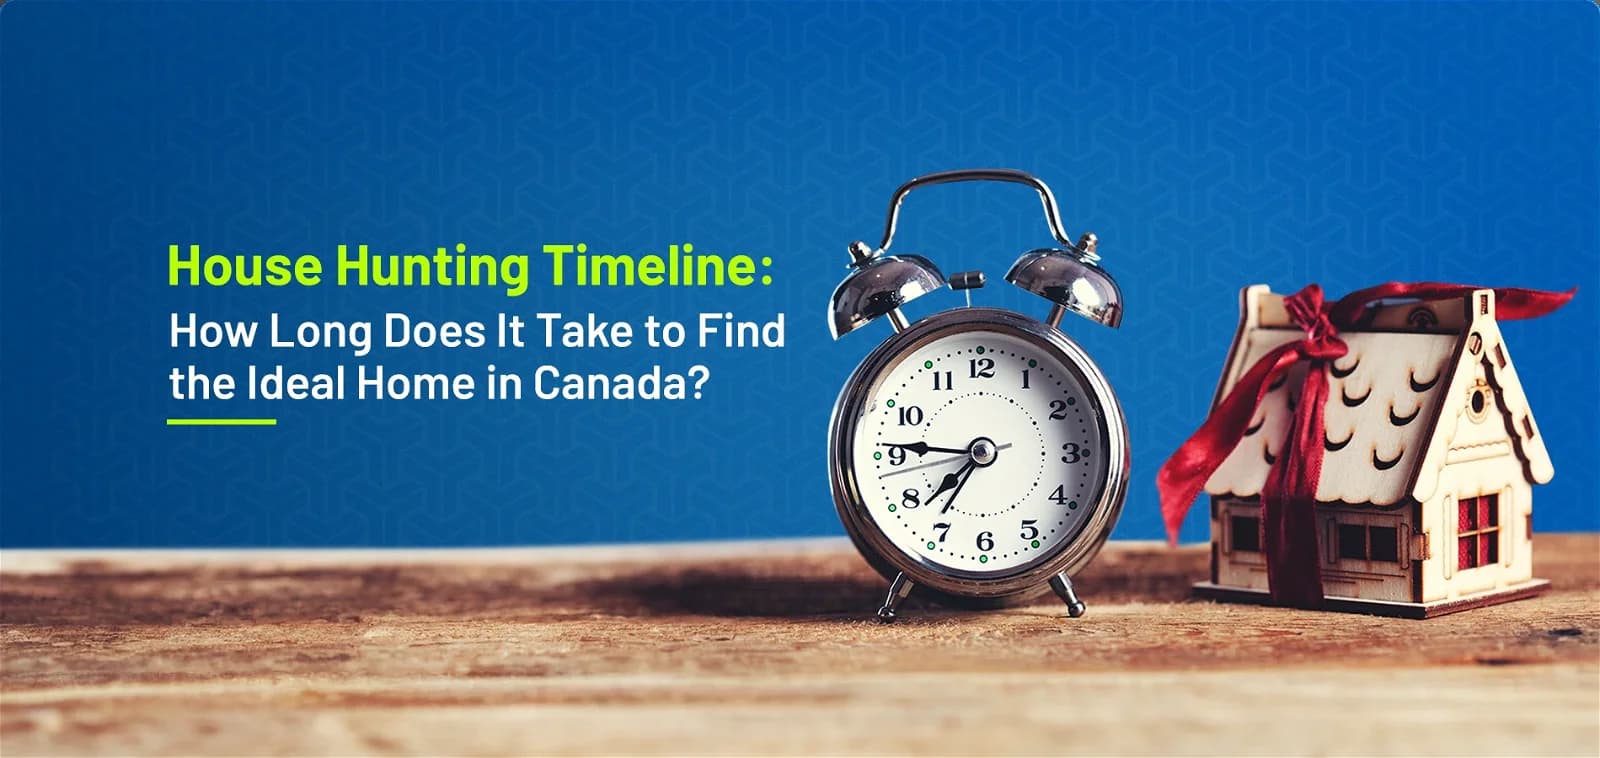 House Hunting Timeline: How Long Does It Take to Find the Ideal Home in Canada?